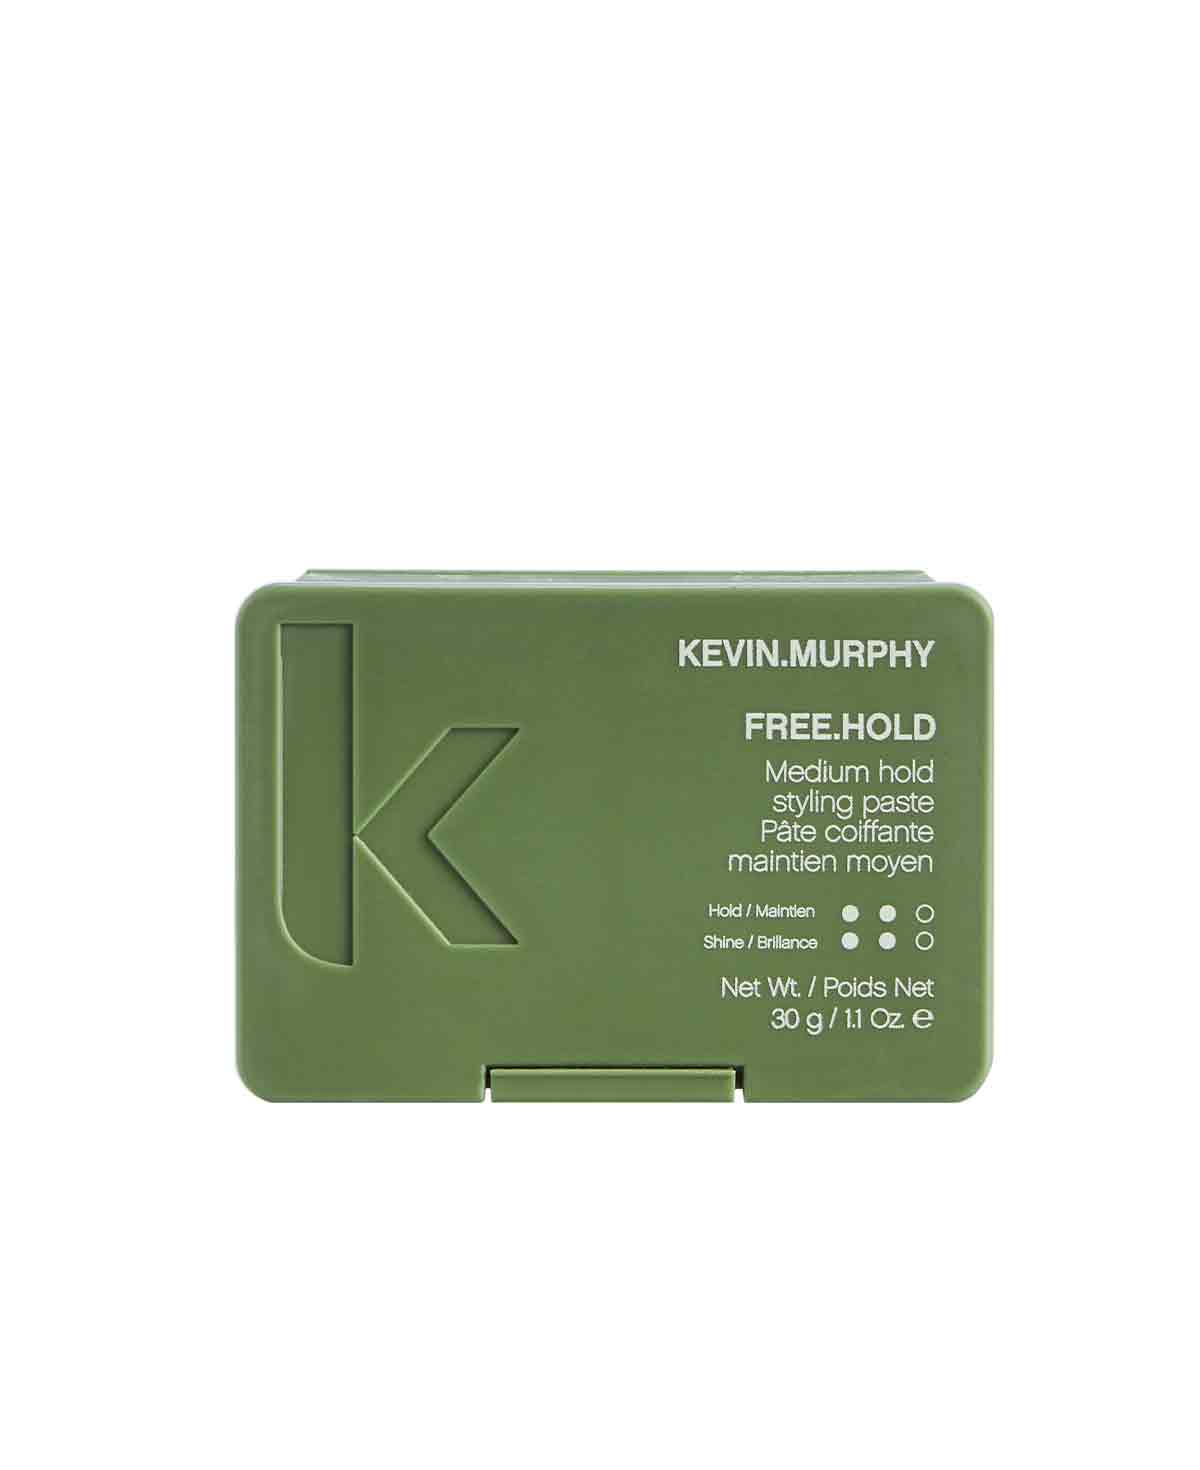 Kevin.Murphy FREE.HOLD 30g